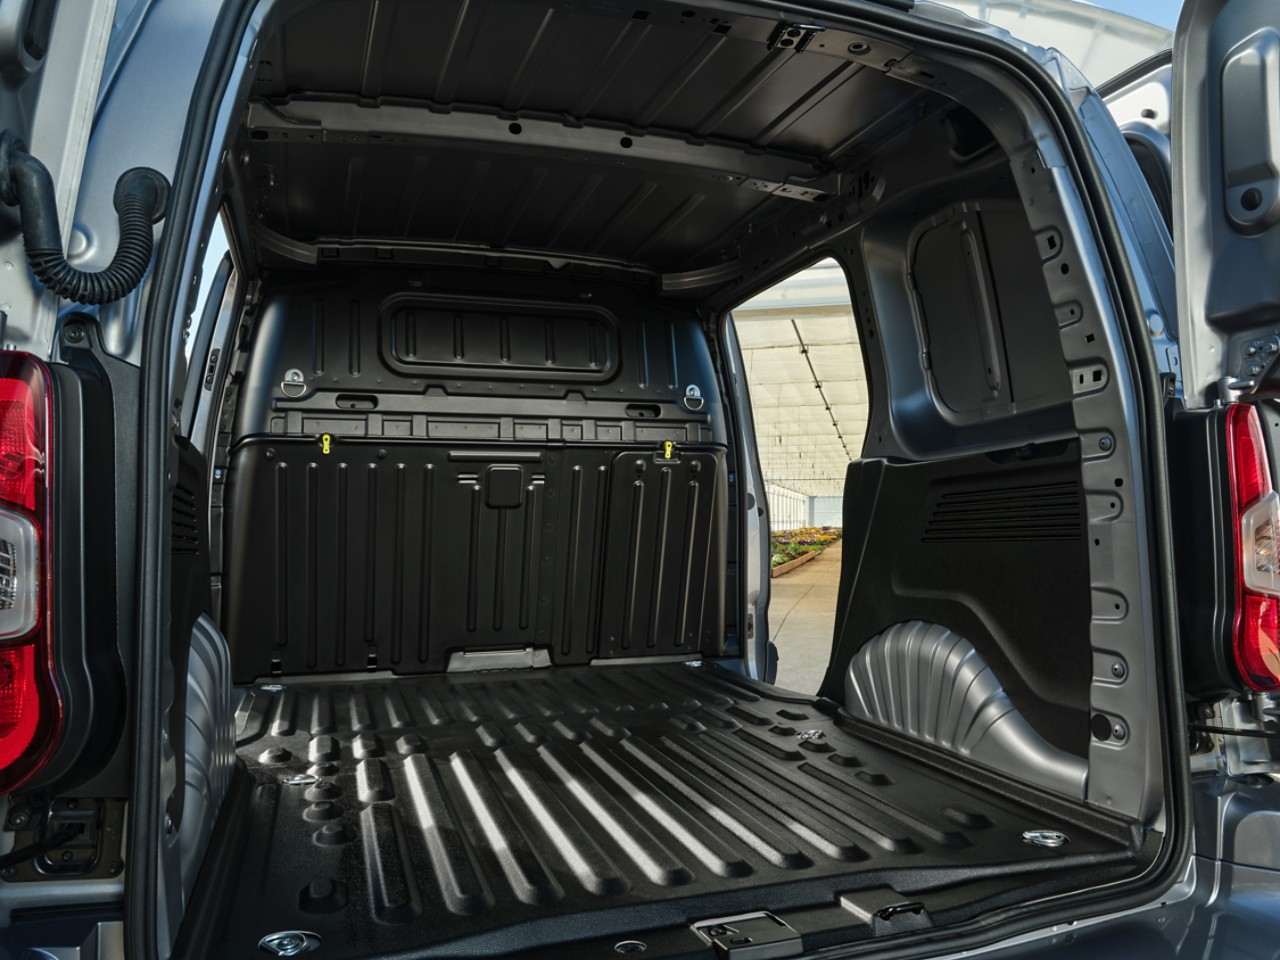 The Proace City’s large, flat-floored cargo area 